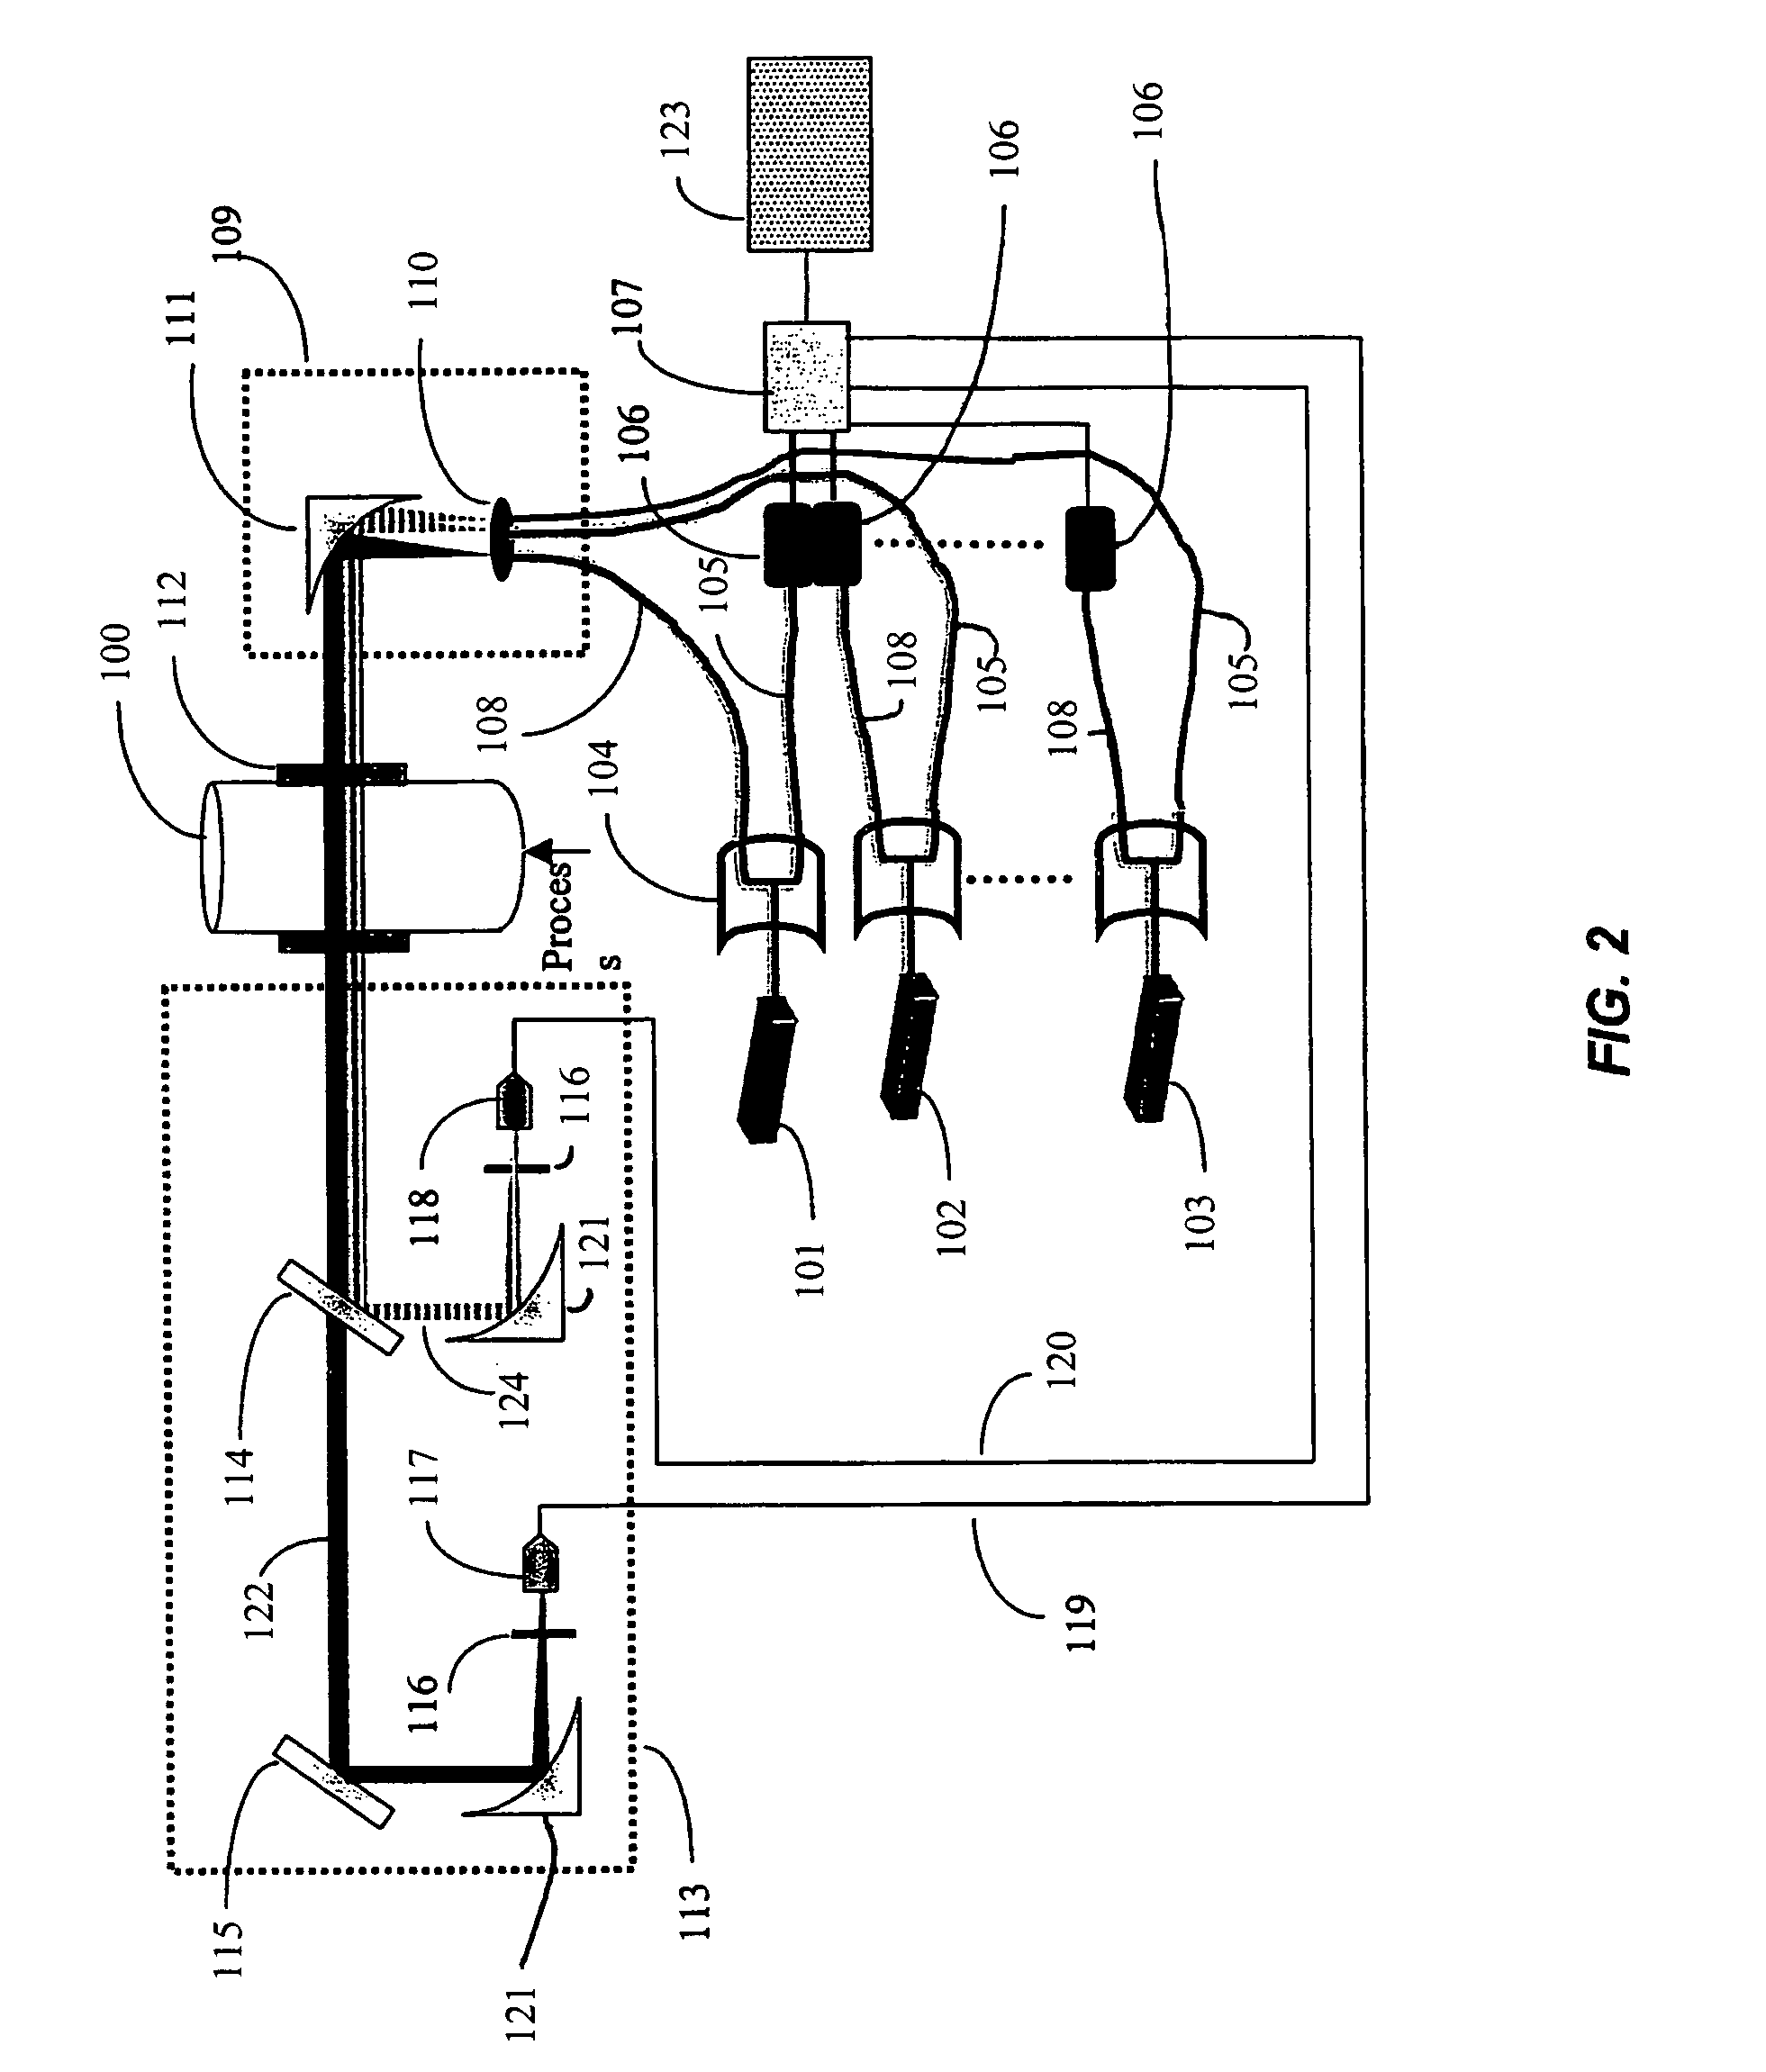 Apparatus and methods for launching and receiving a broad wavelength range source